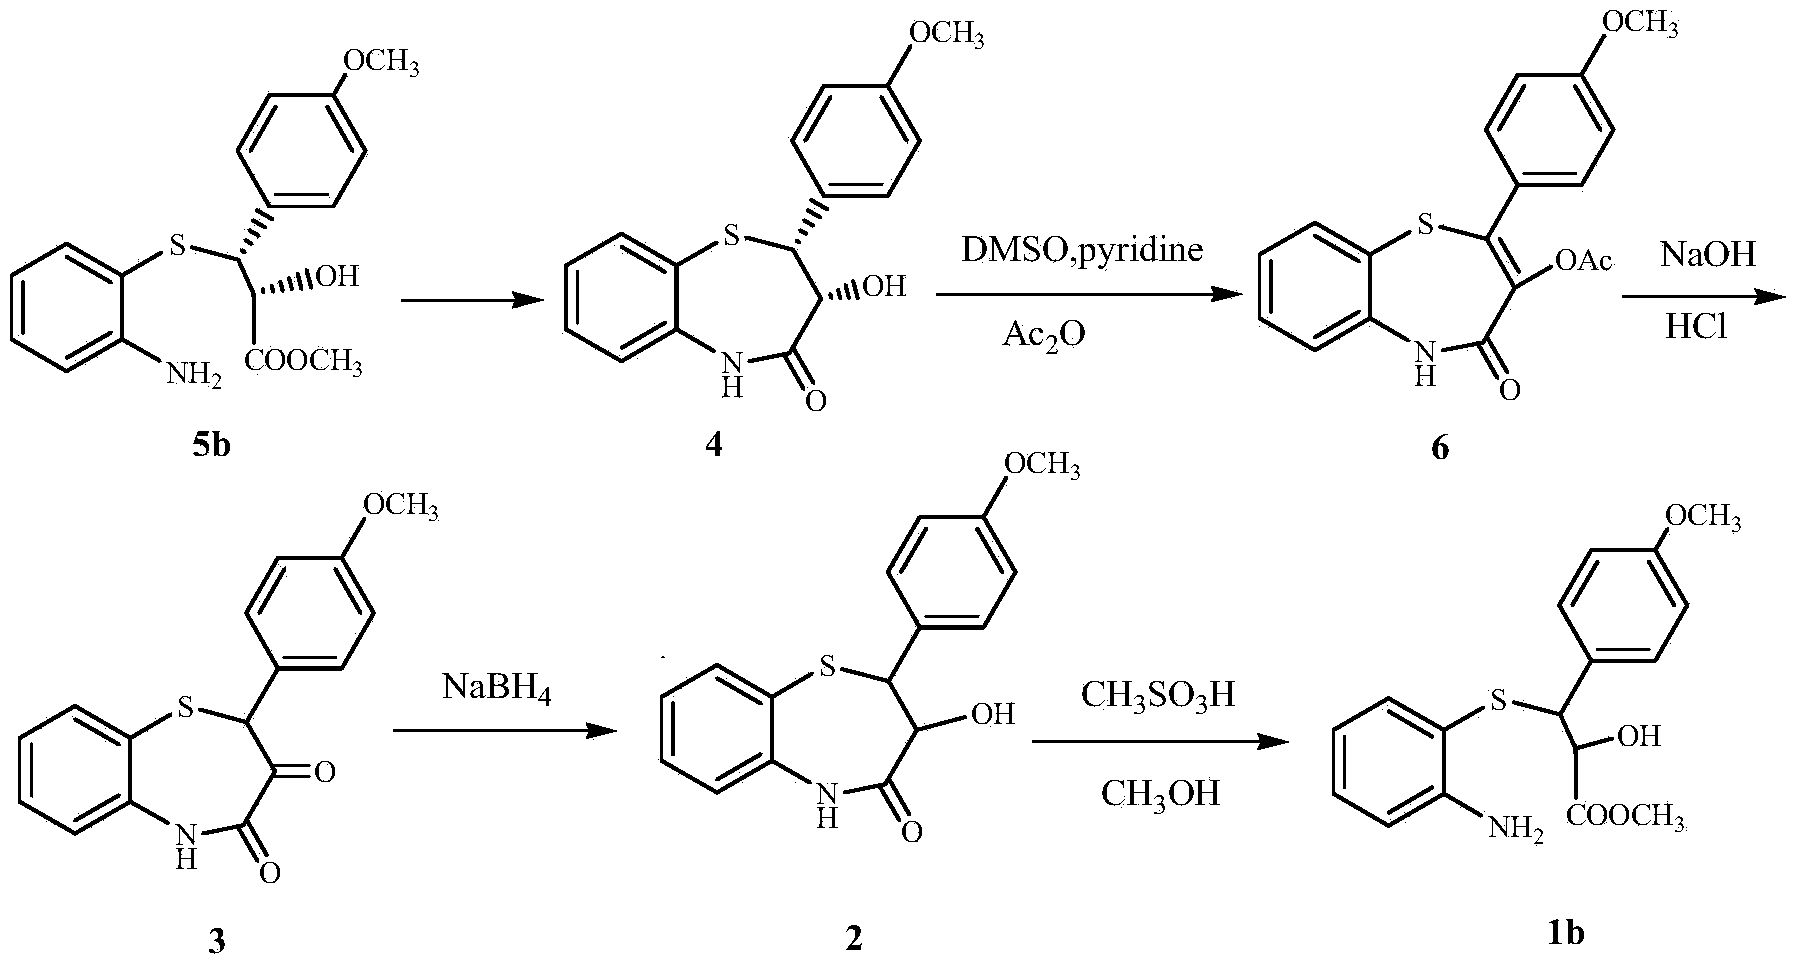 Process for recycling L-cis-lactam as diltiazem intermediate by-product